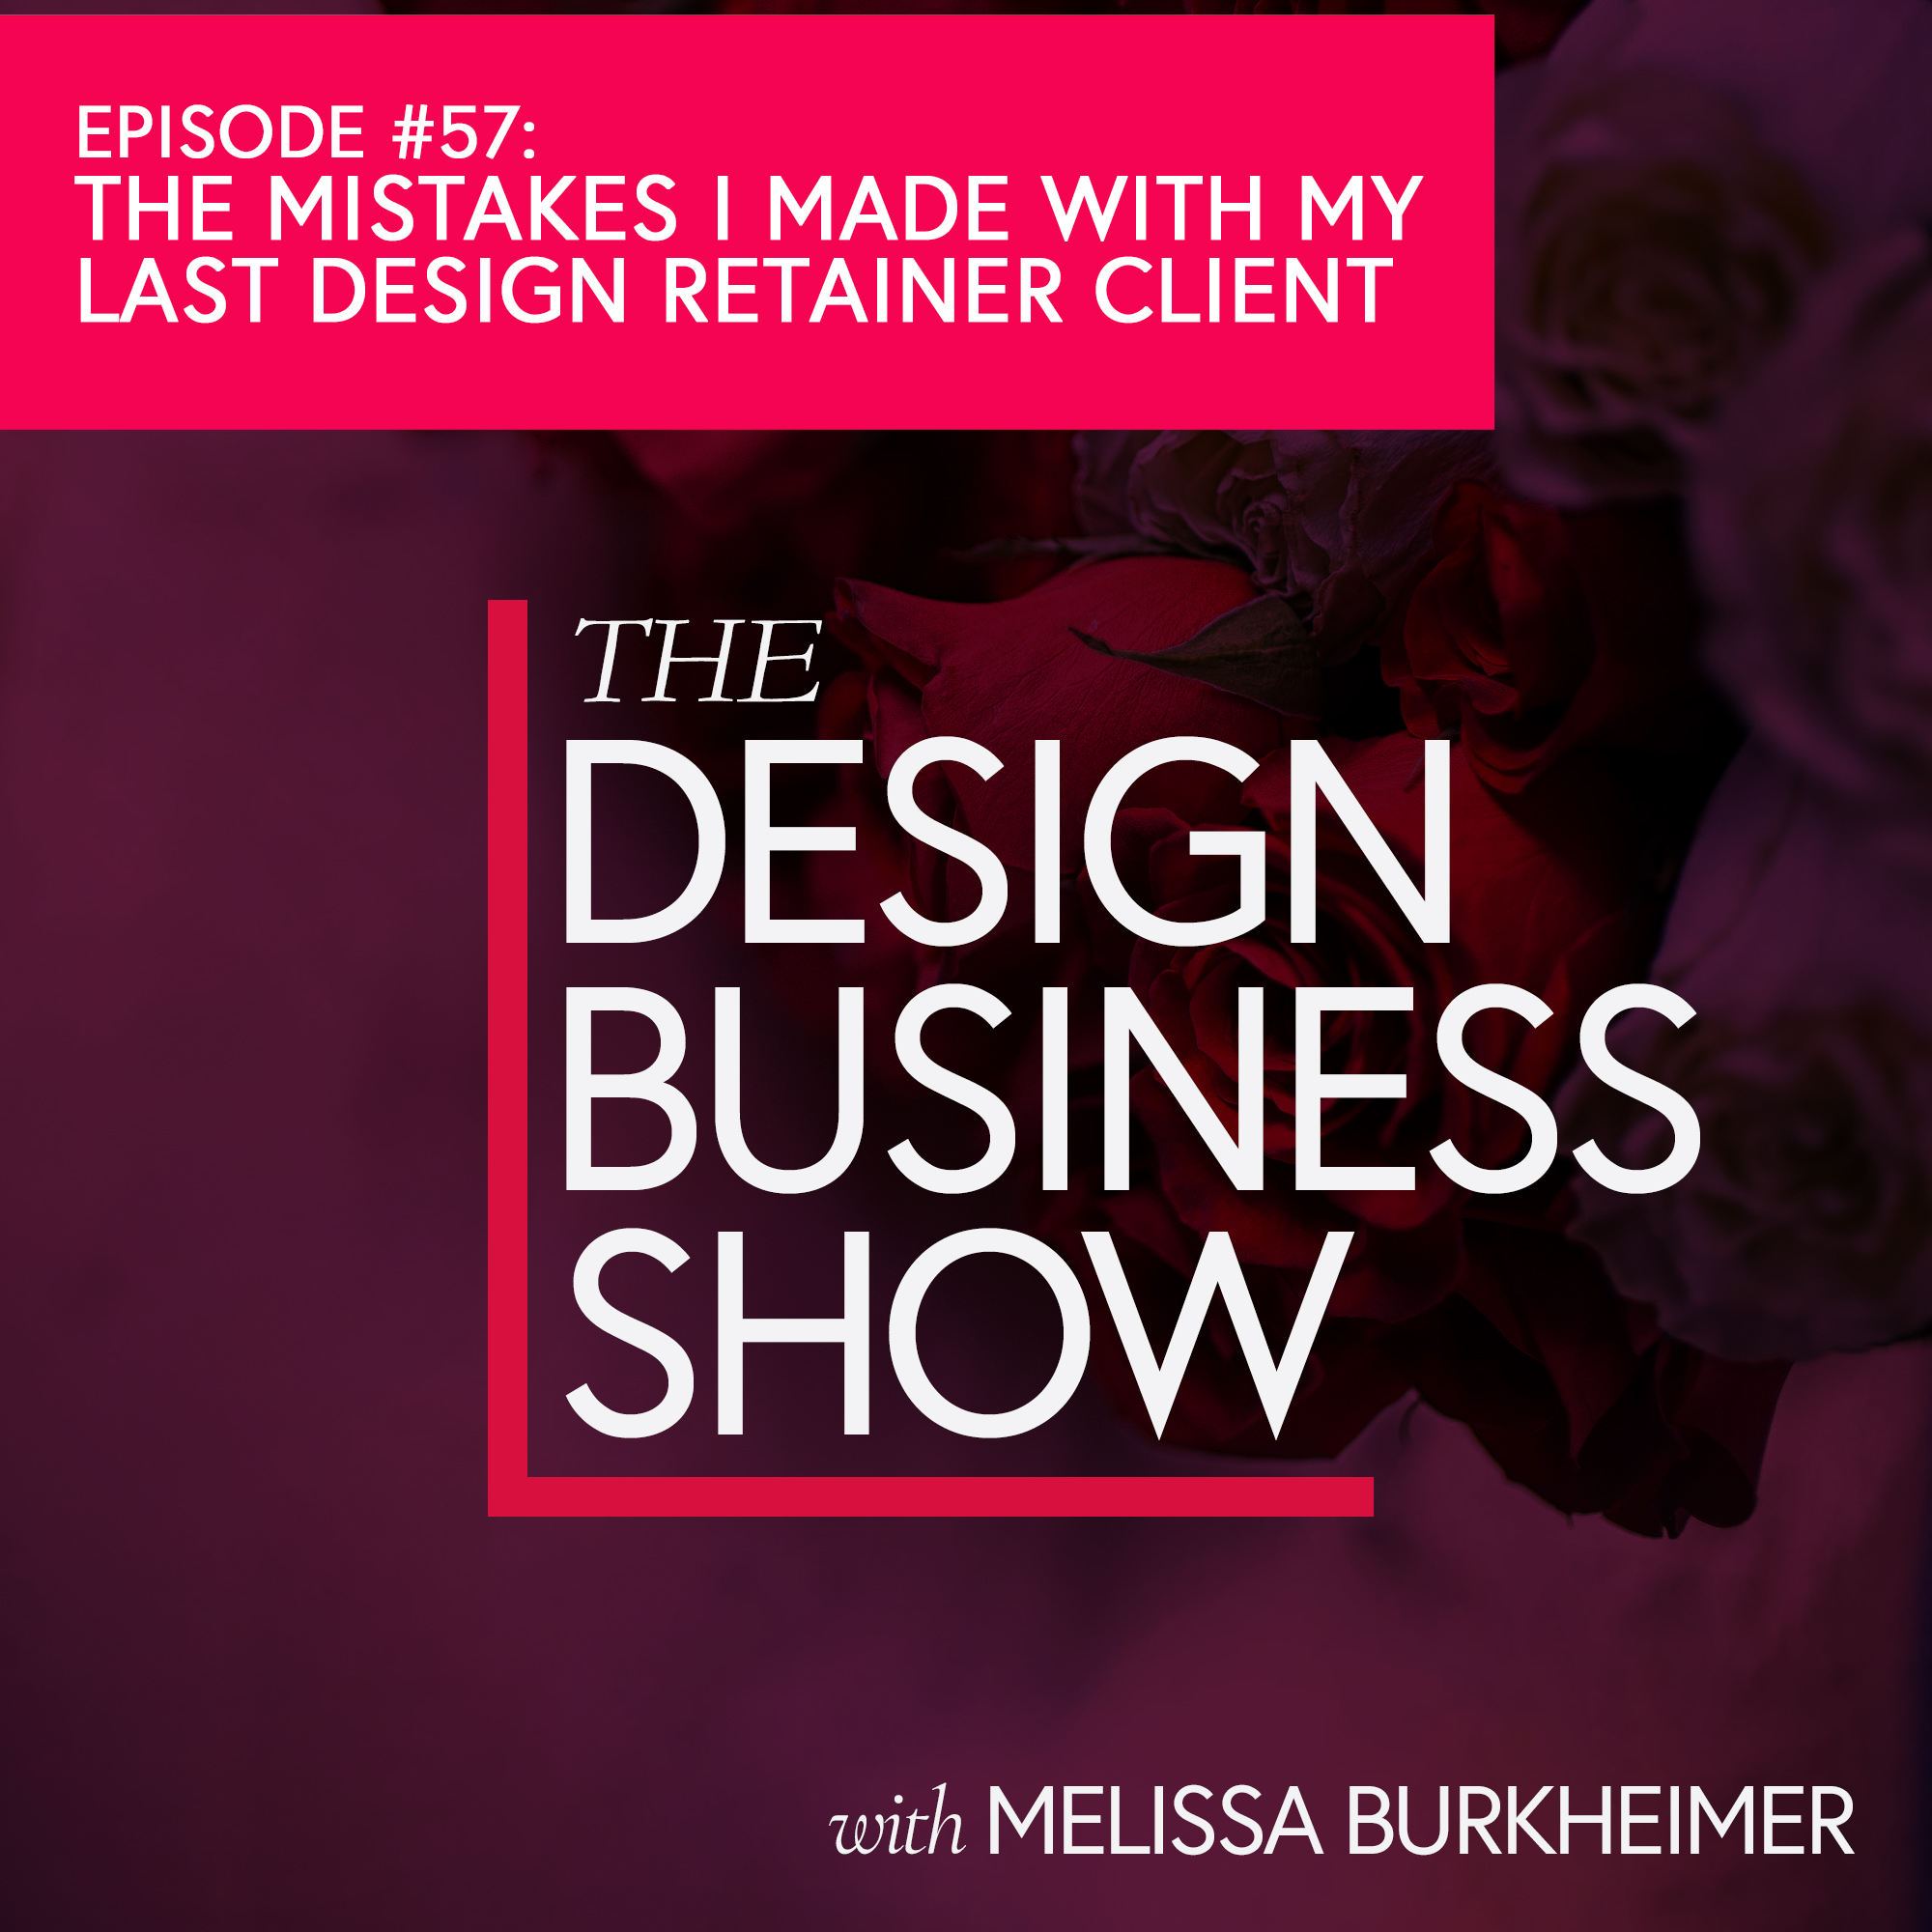 Check out episode 57 of The Design Business Show with to learn all the mistakes I made during my last retainer project.